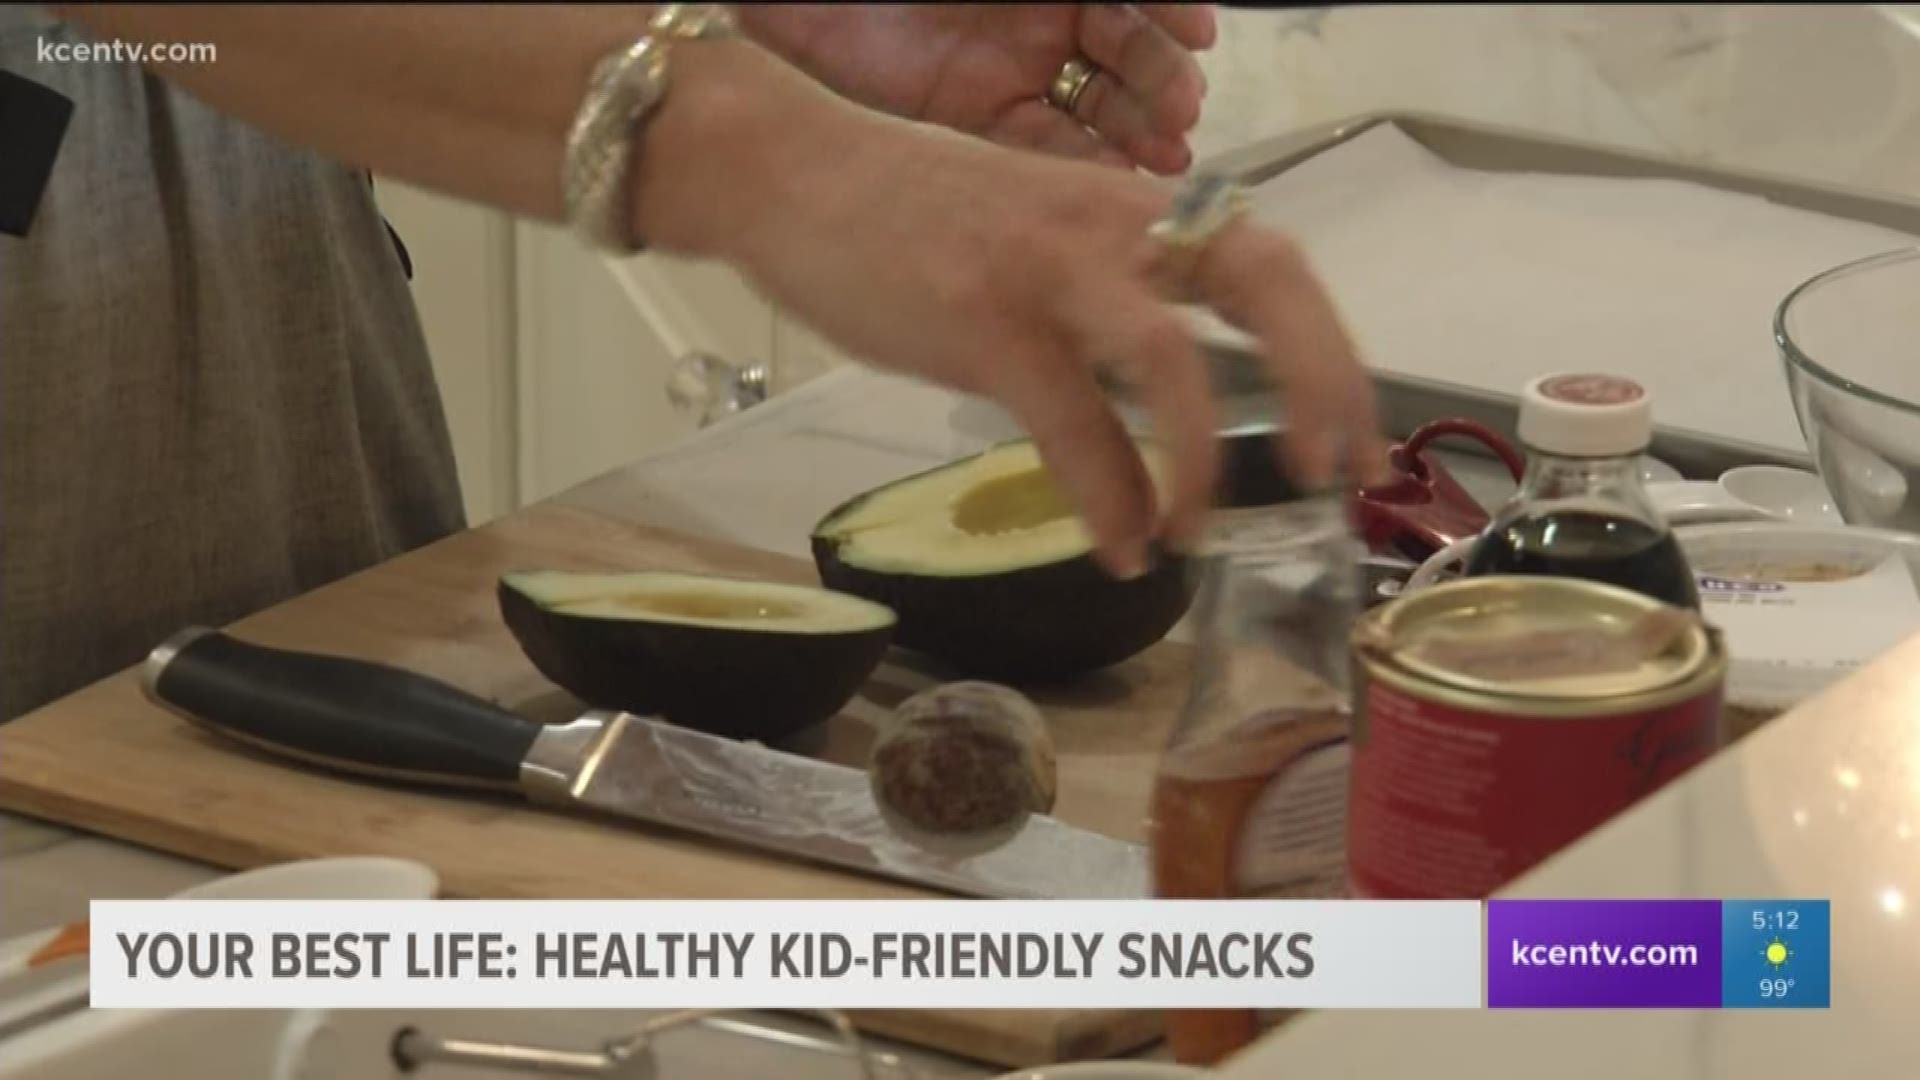 A local mom and fitness guru shows off some wholesome afternoon snacks that are kid tested and approved.